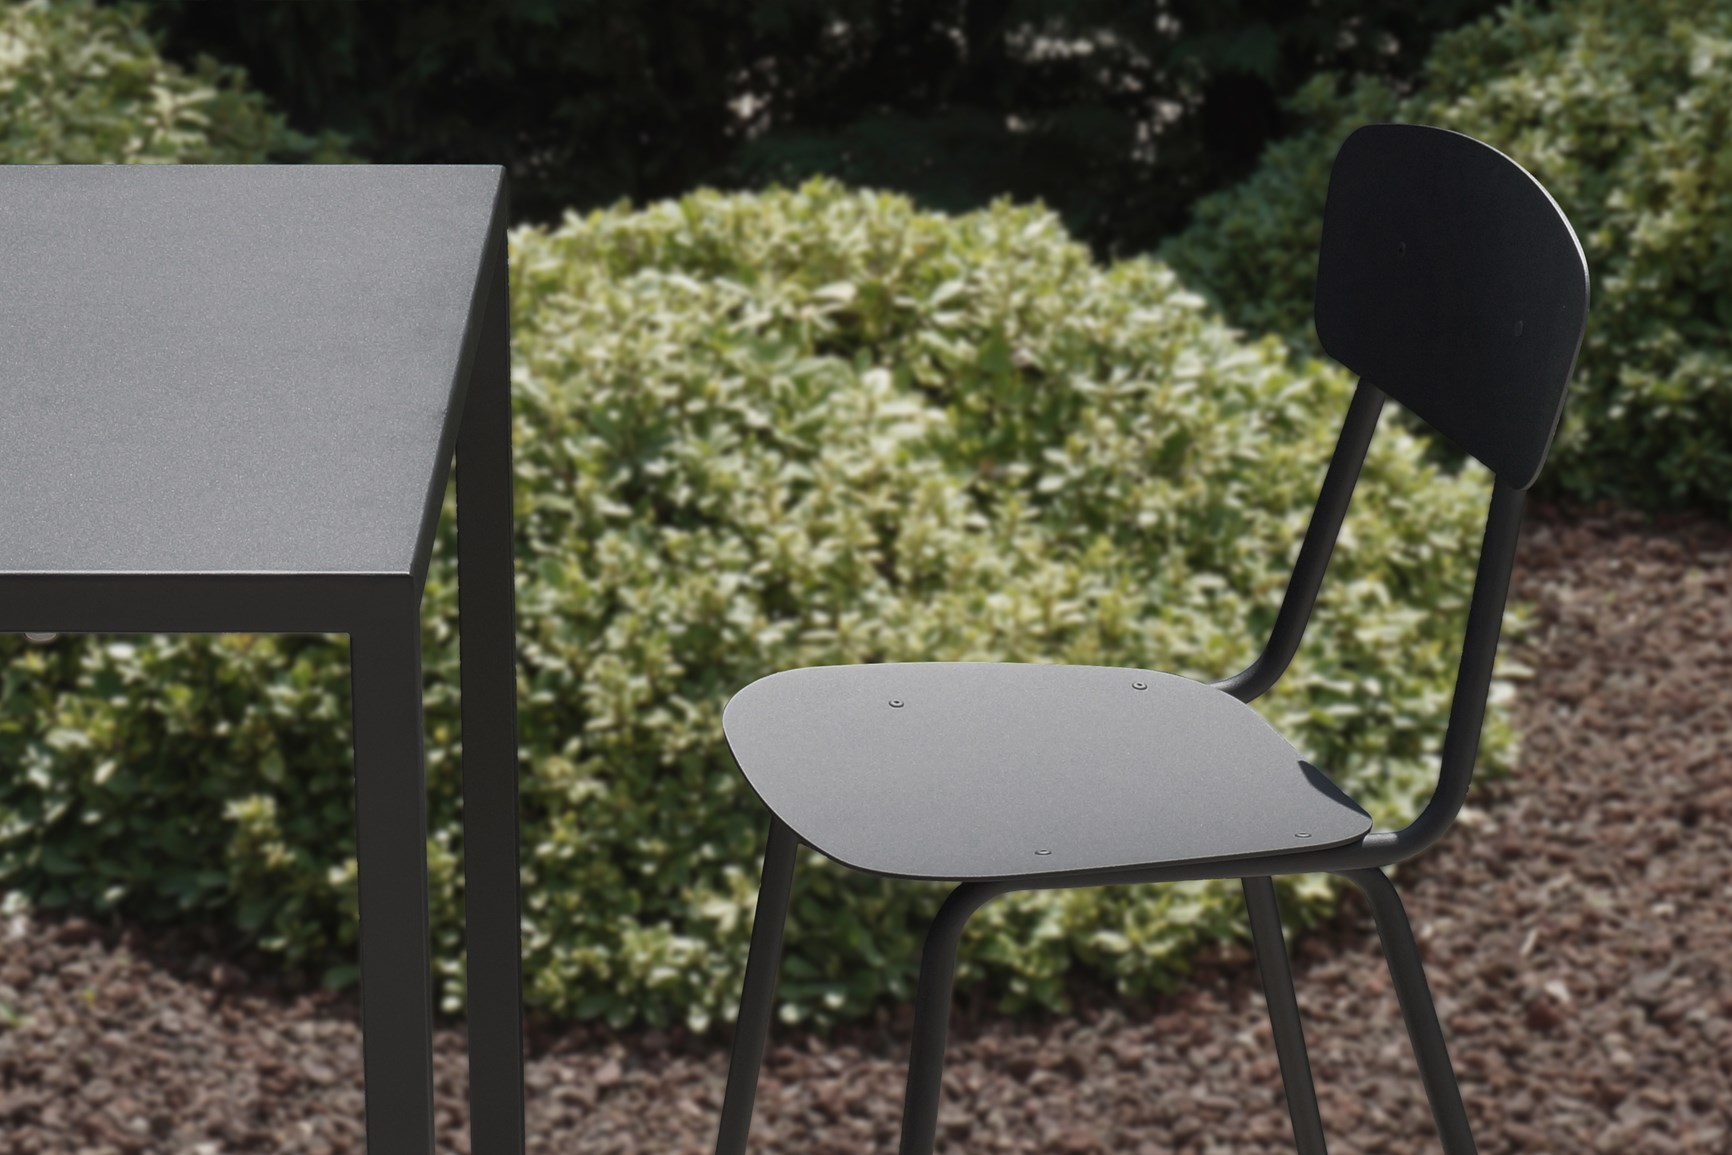 Simple Outdoor Furniture Collection by Mara